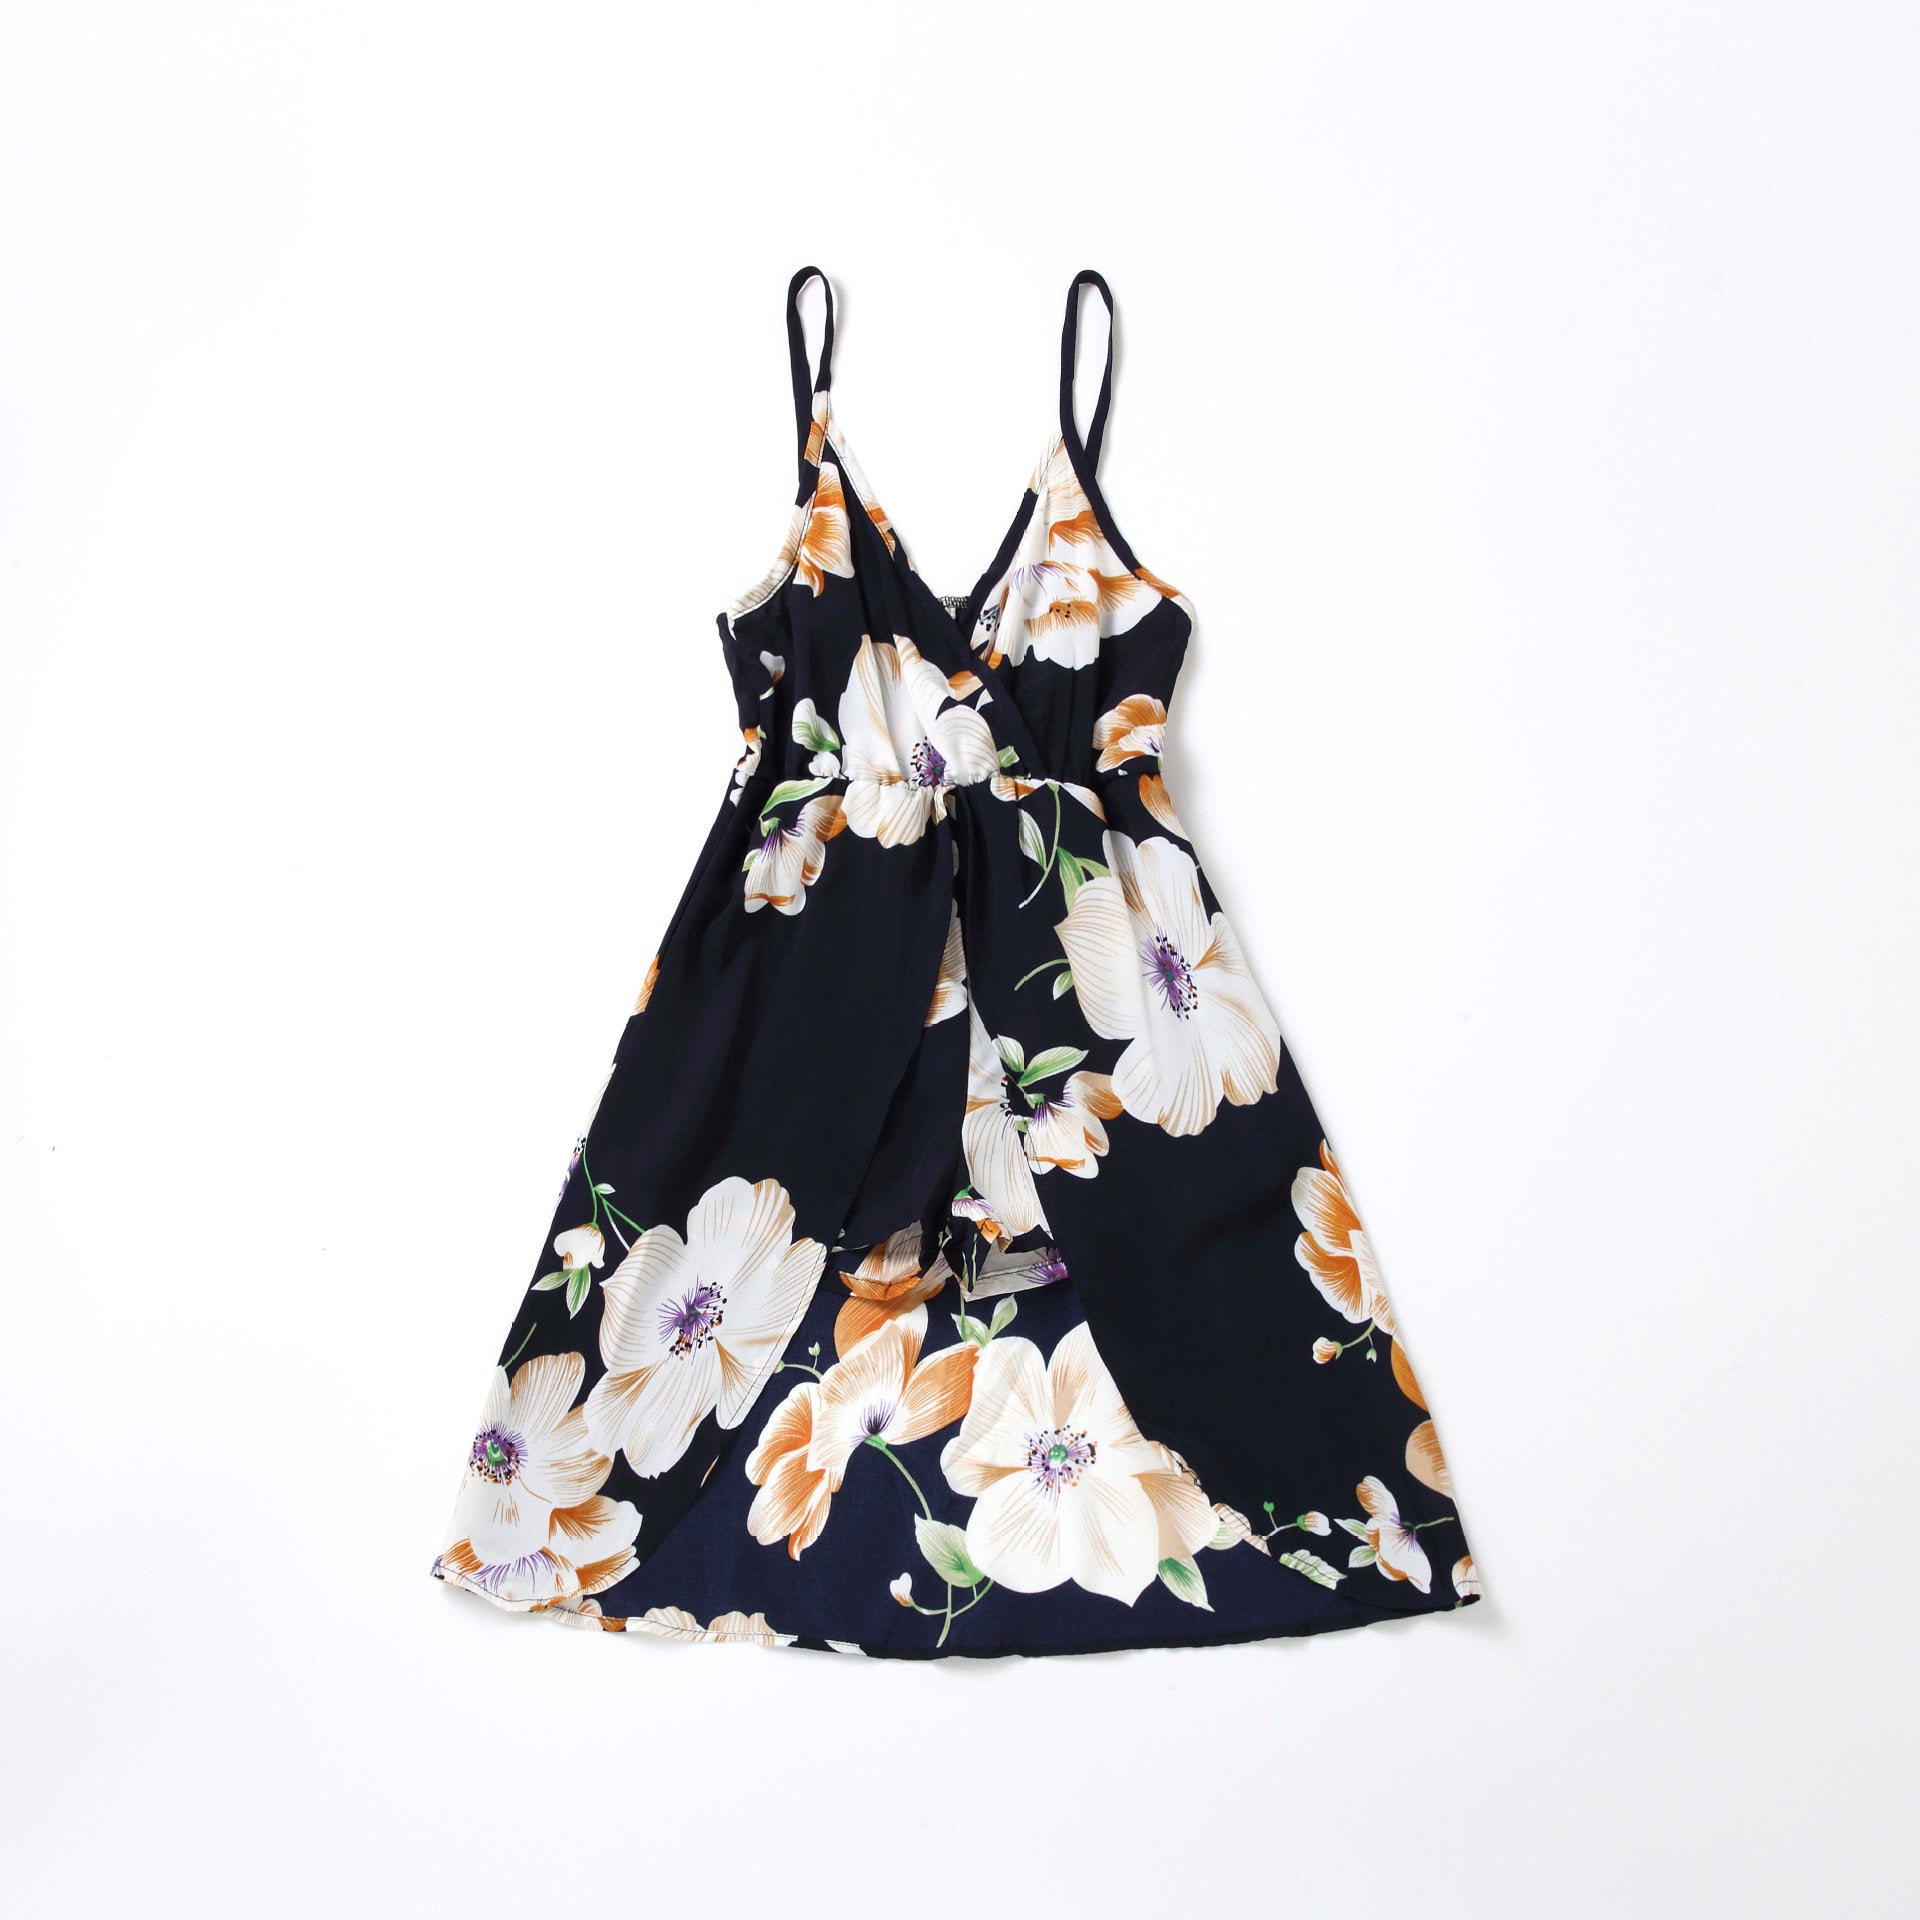 Spring new mother-daughter parent-child dress ruffled spaghetti straps dress